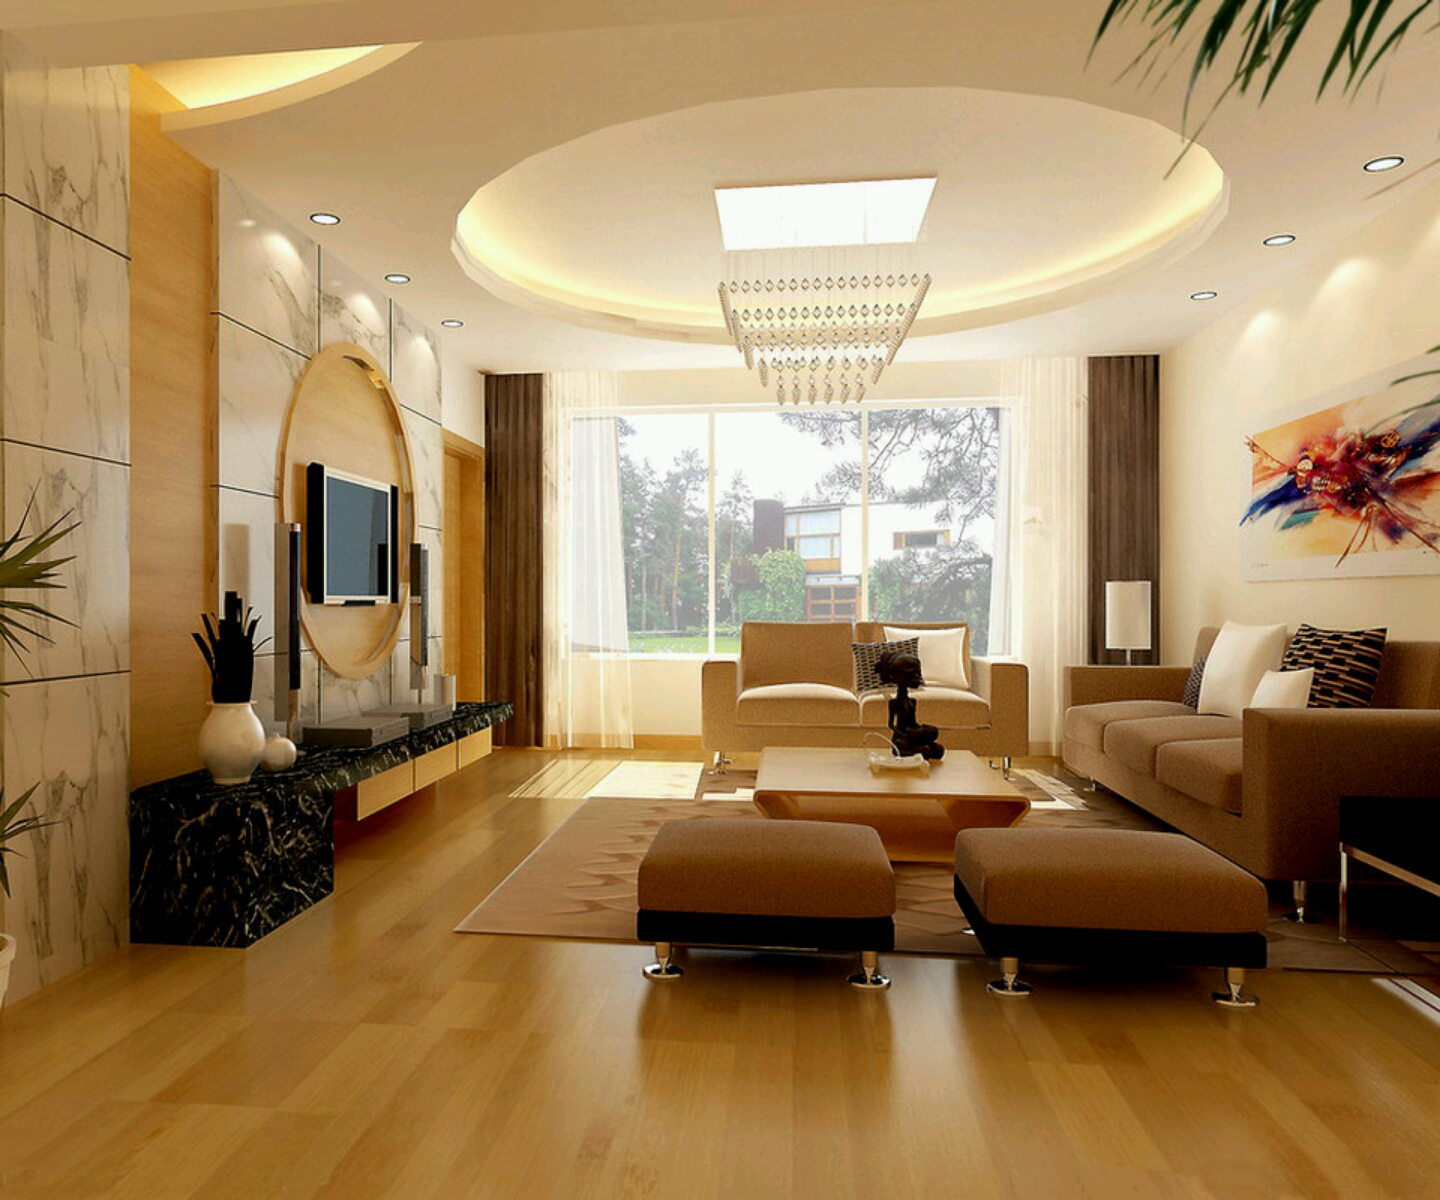 Ceiling Decorating Ideas Dream House Experience